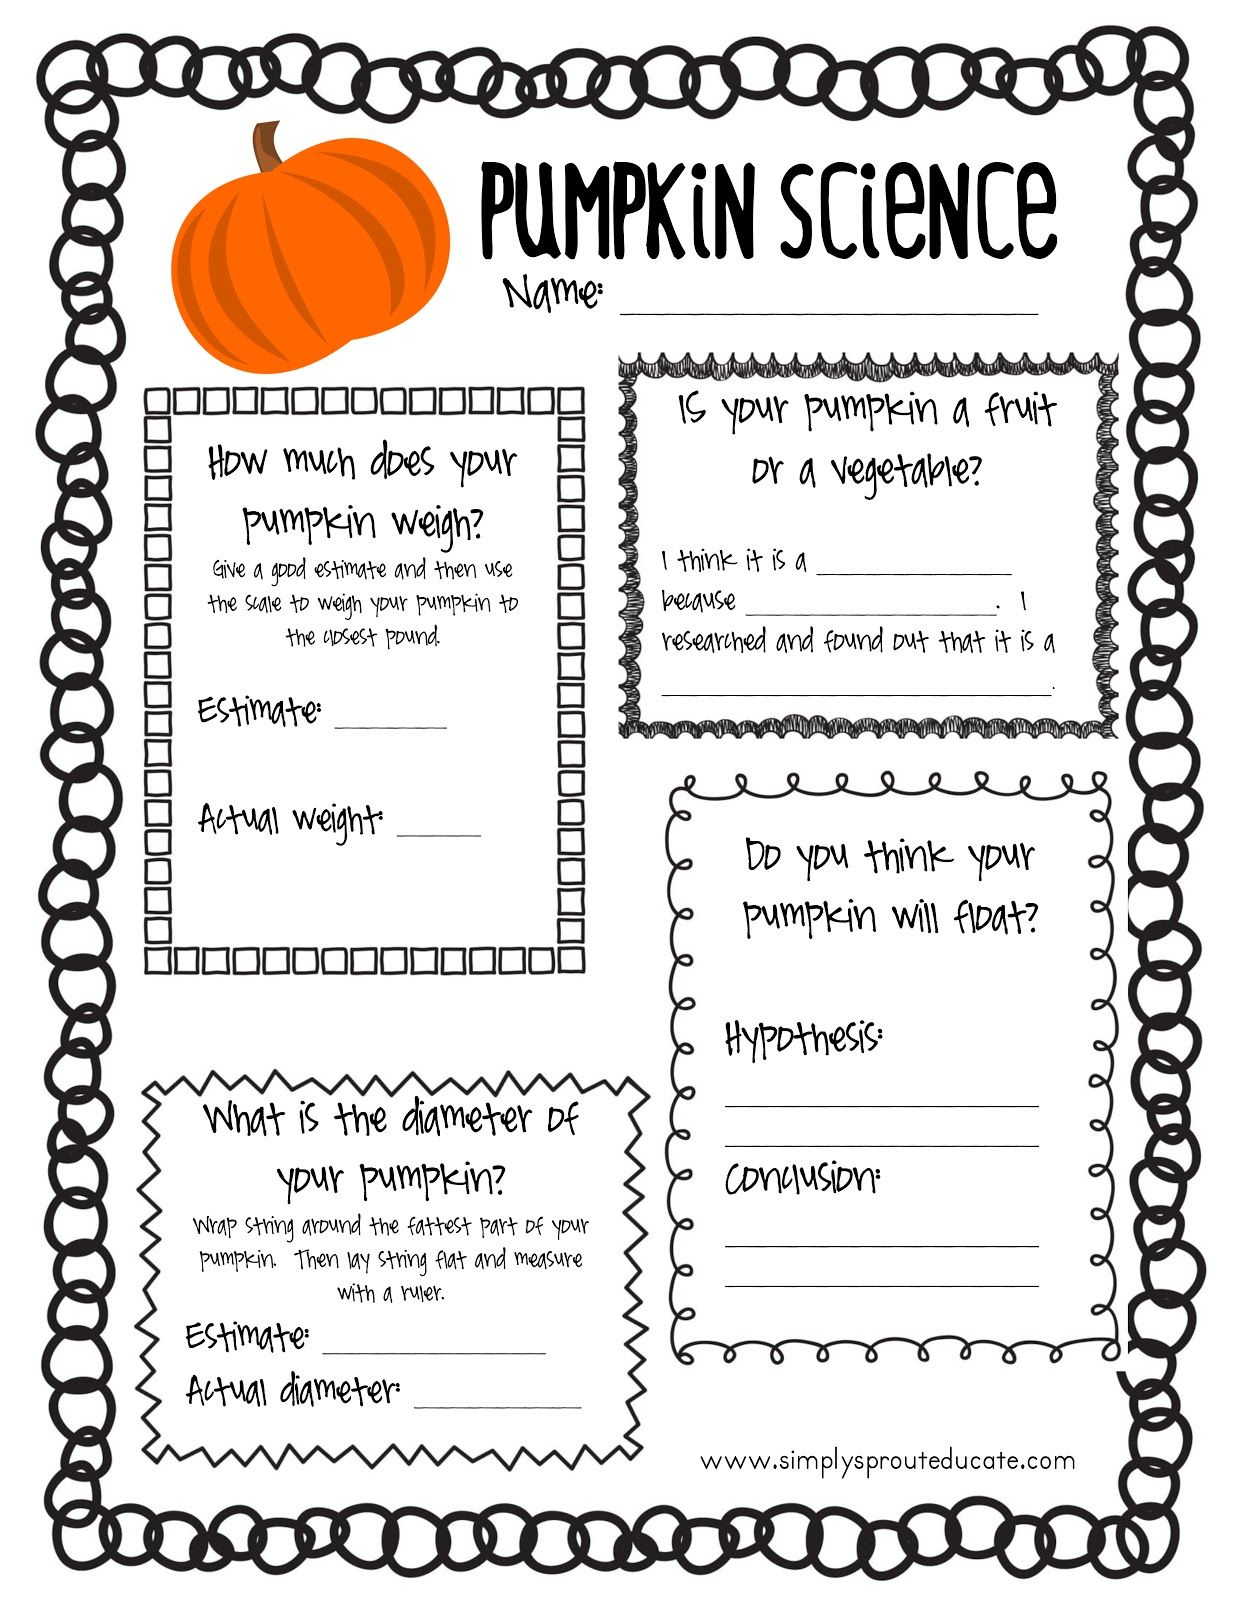 Simply Sprout Free Printable Halloween Science Halloween Science